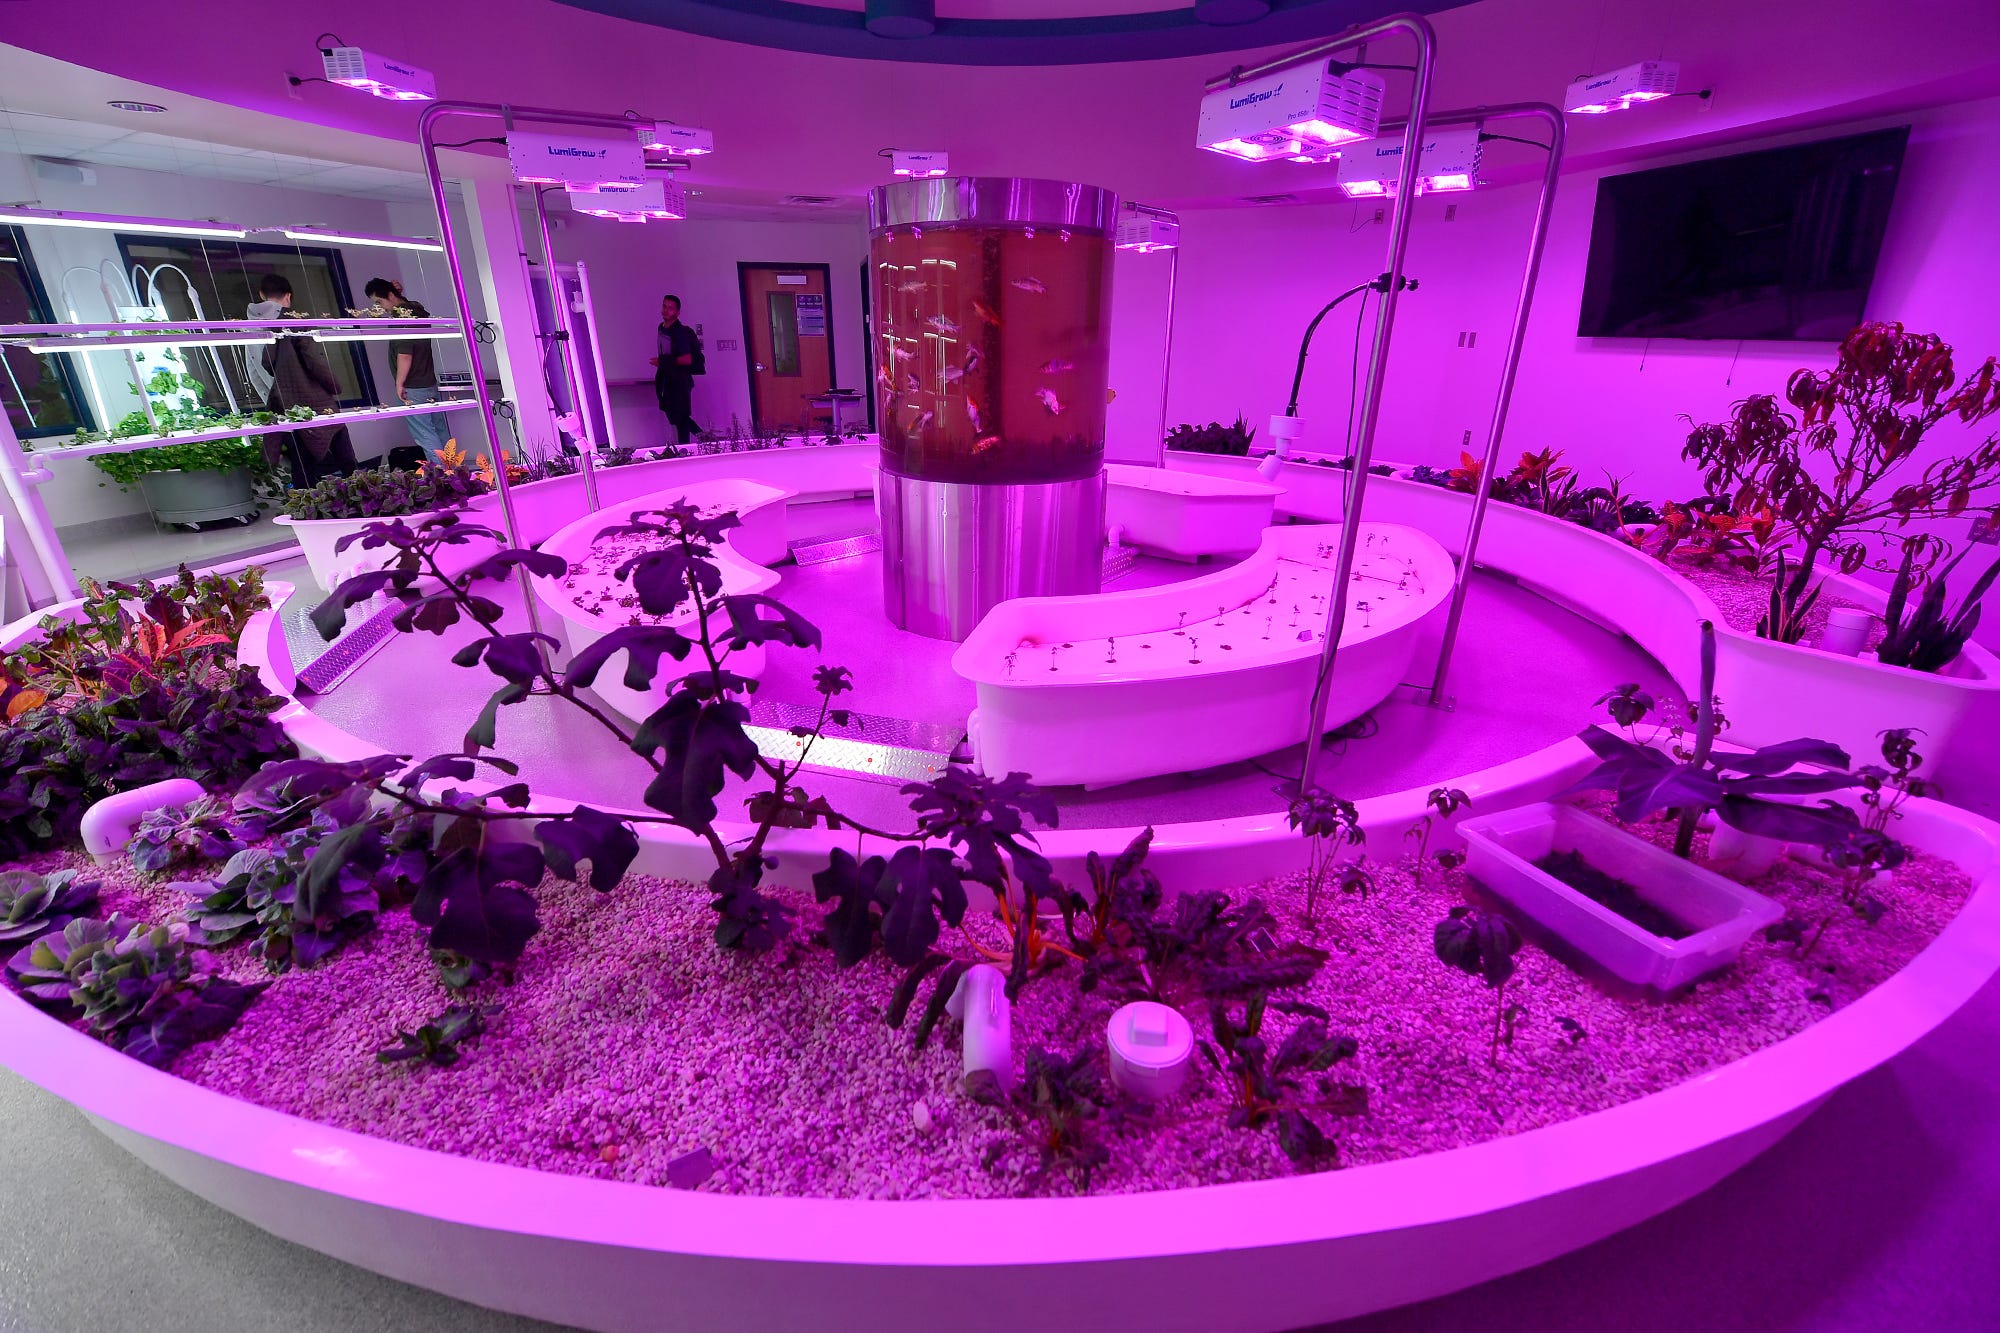 Students at West Shore School District are developing green thumbs with the West Shore Aquaponics lab. 
Tuesday, December 3, 2019
John A. Pavoncello photo